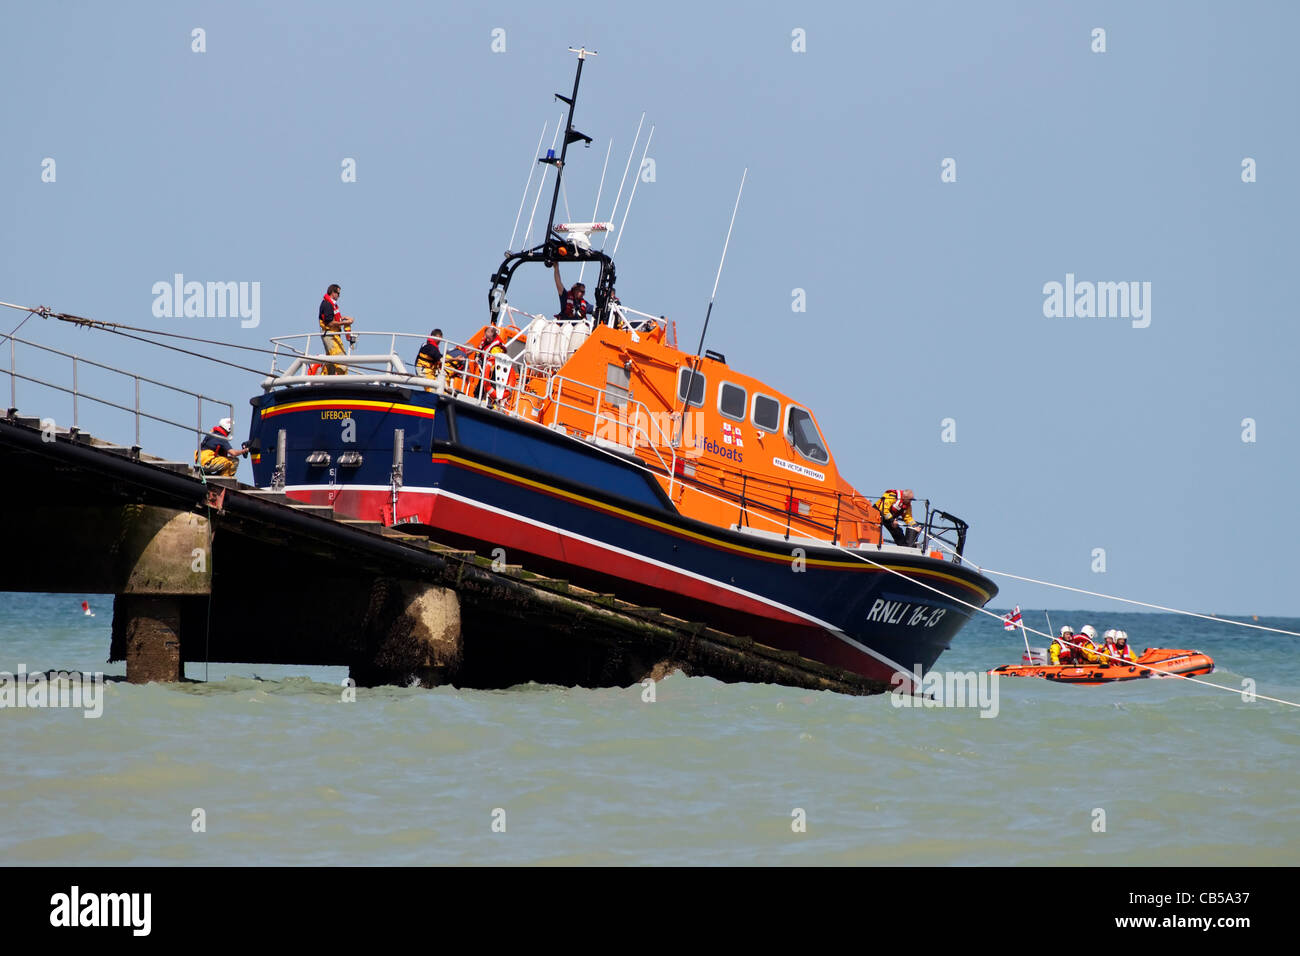 The Cromer offshore Lifeboat - The Tamar class RNLB Victor Freeman being winched back up the ramp and in to the boat house Stock Photo